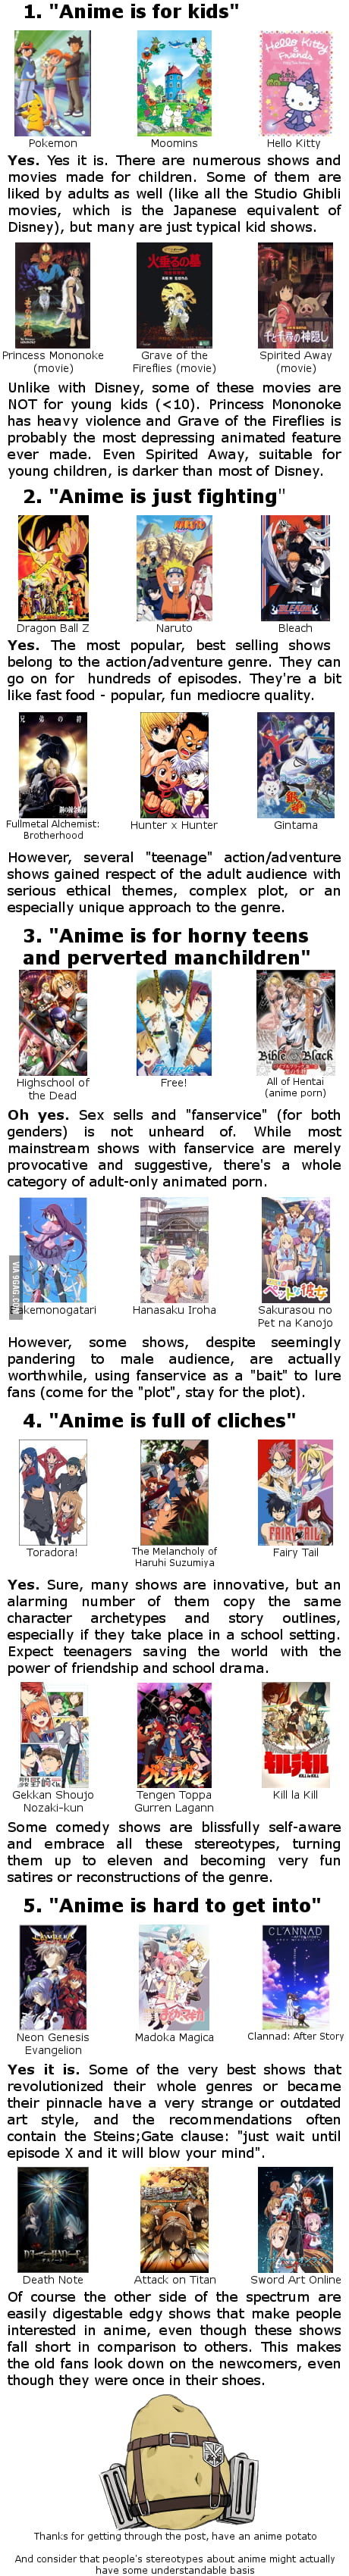 What Anime Archetype are you?